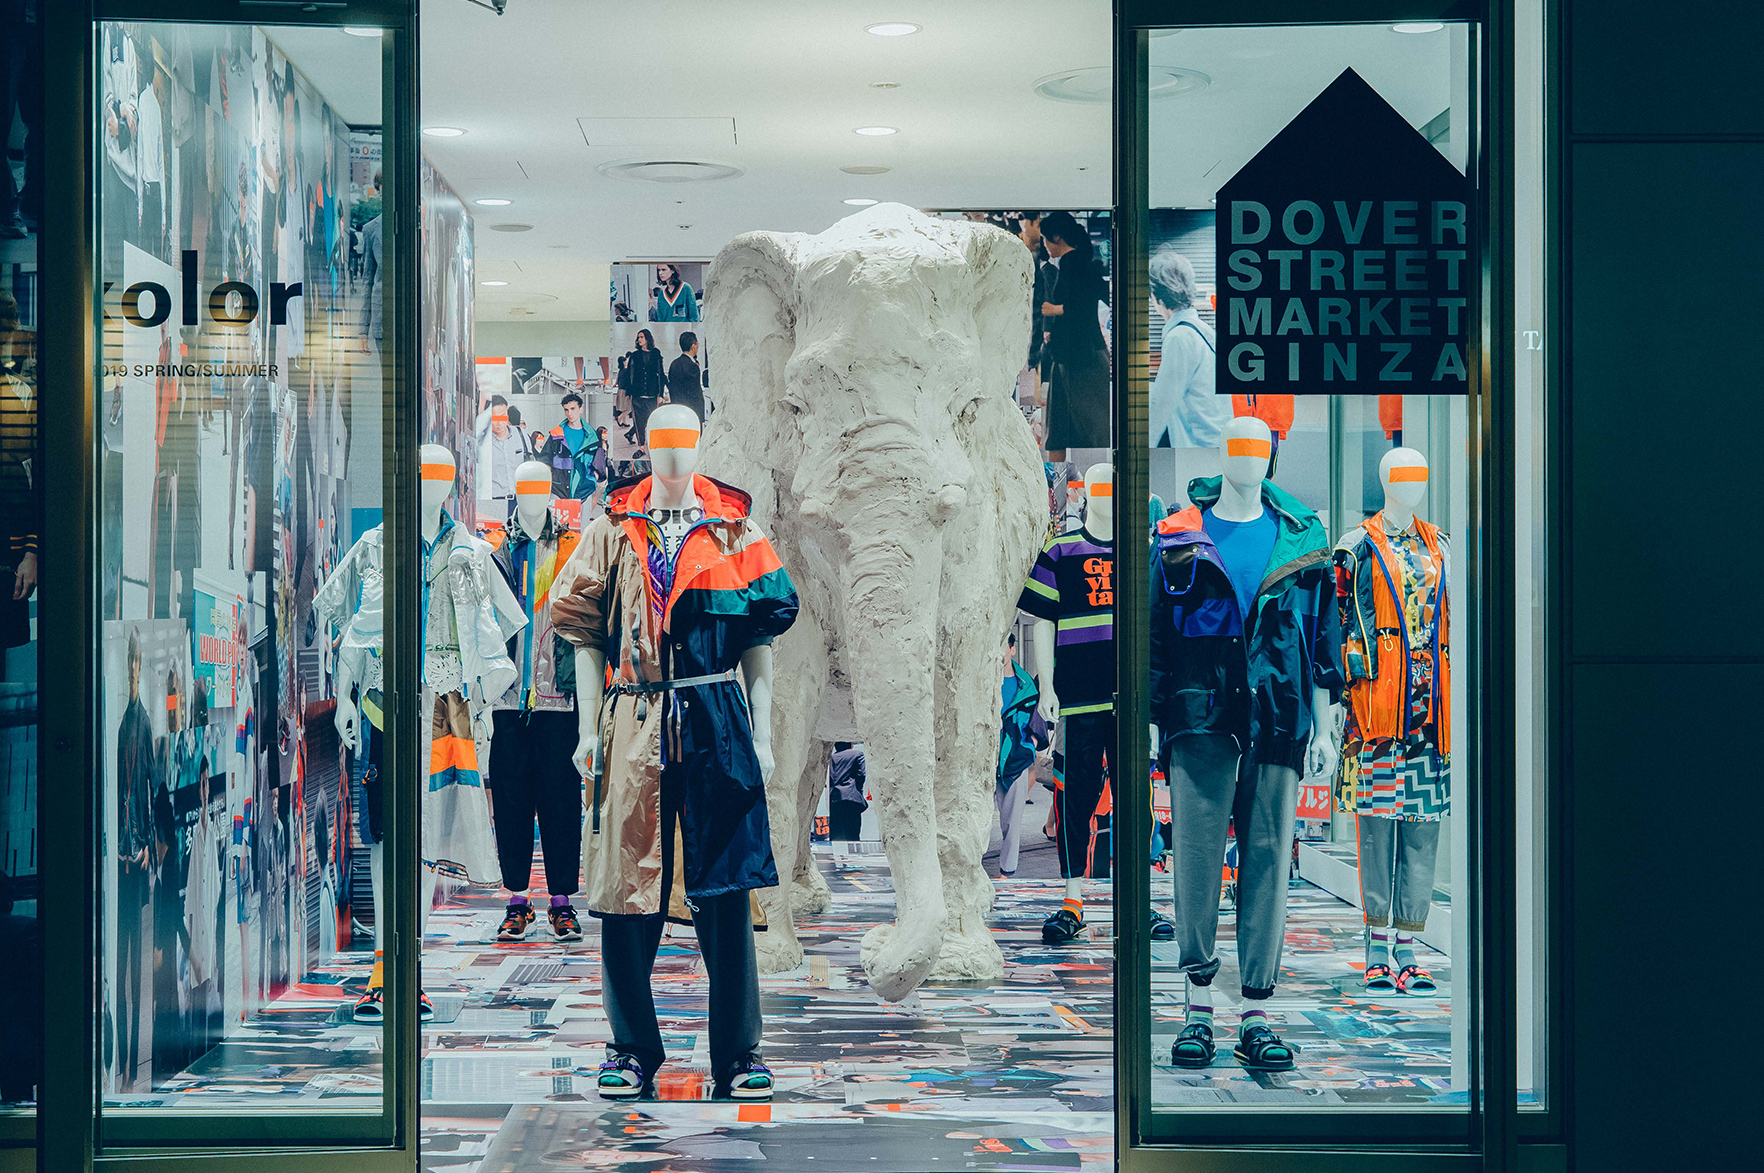 DOVER STREET MARKET GINZA, Elephant Space 2018